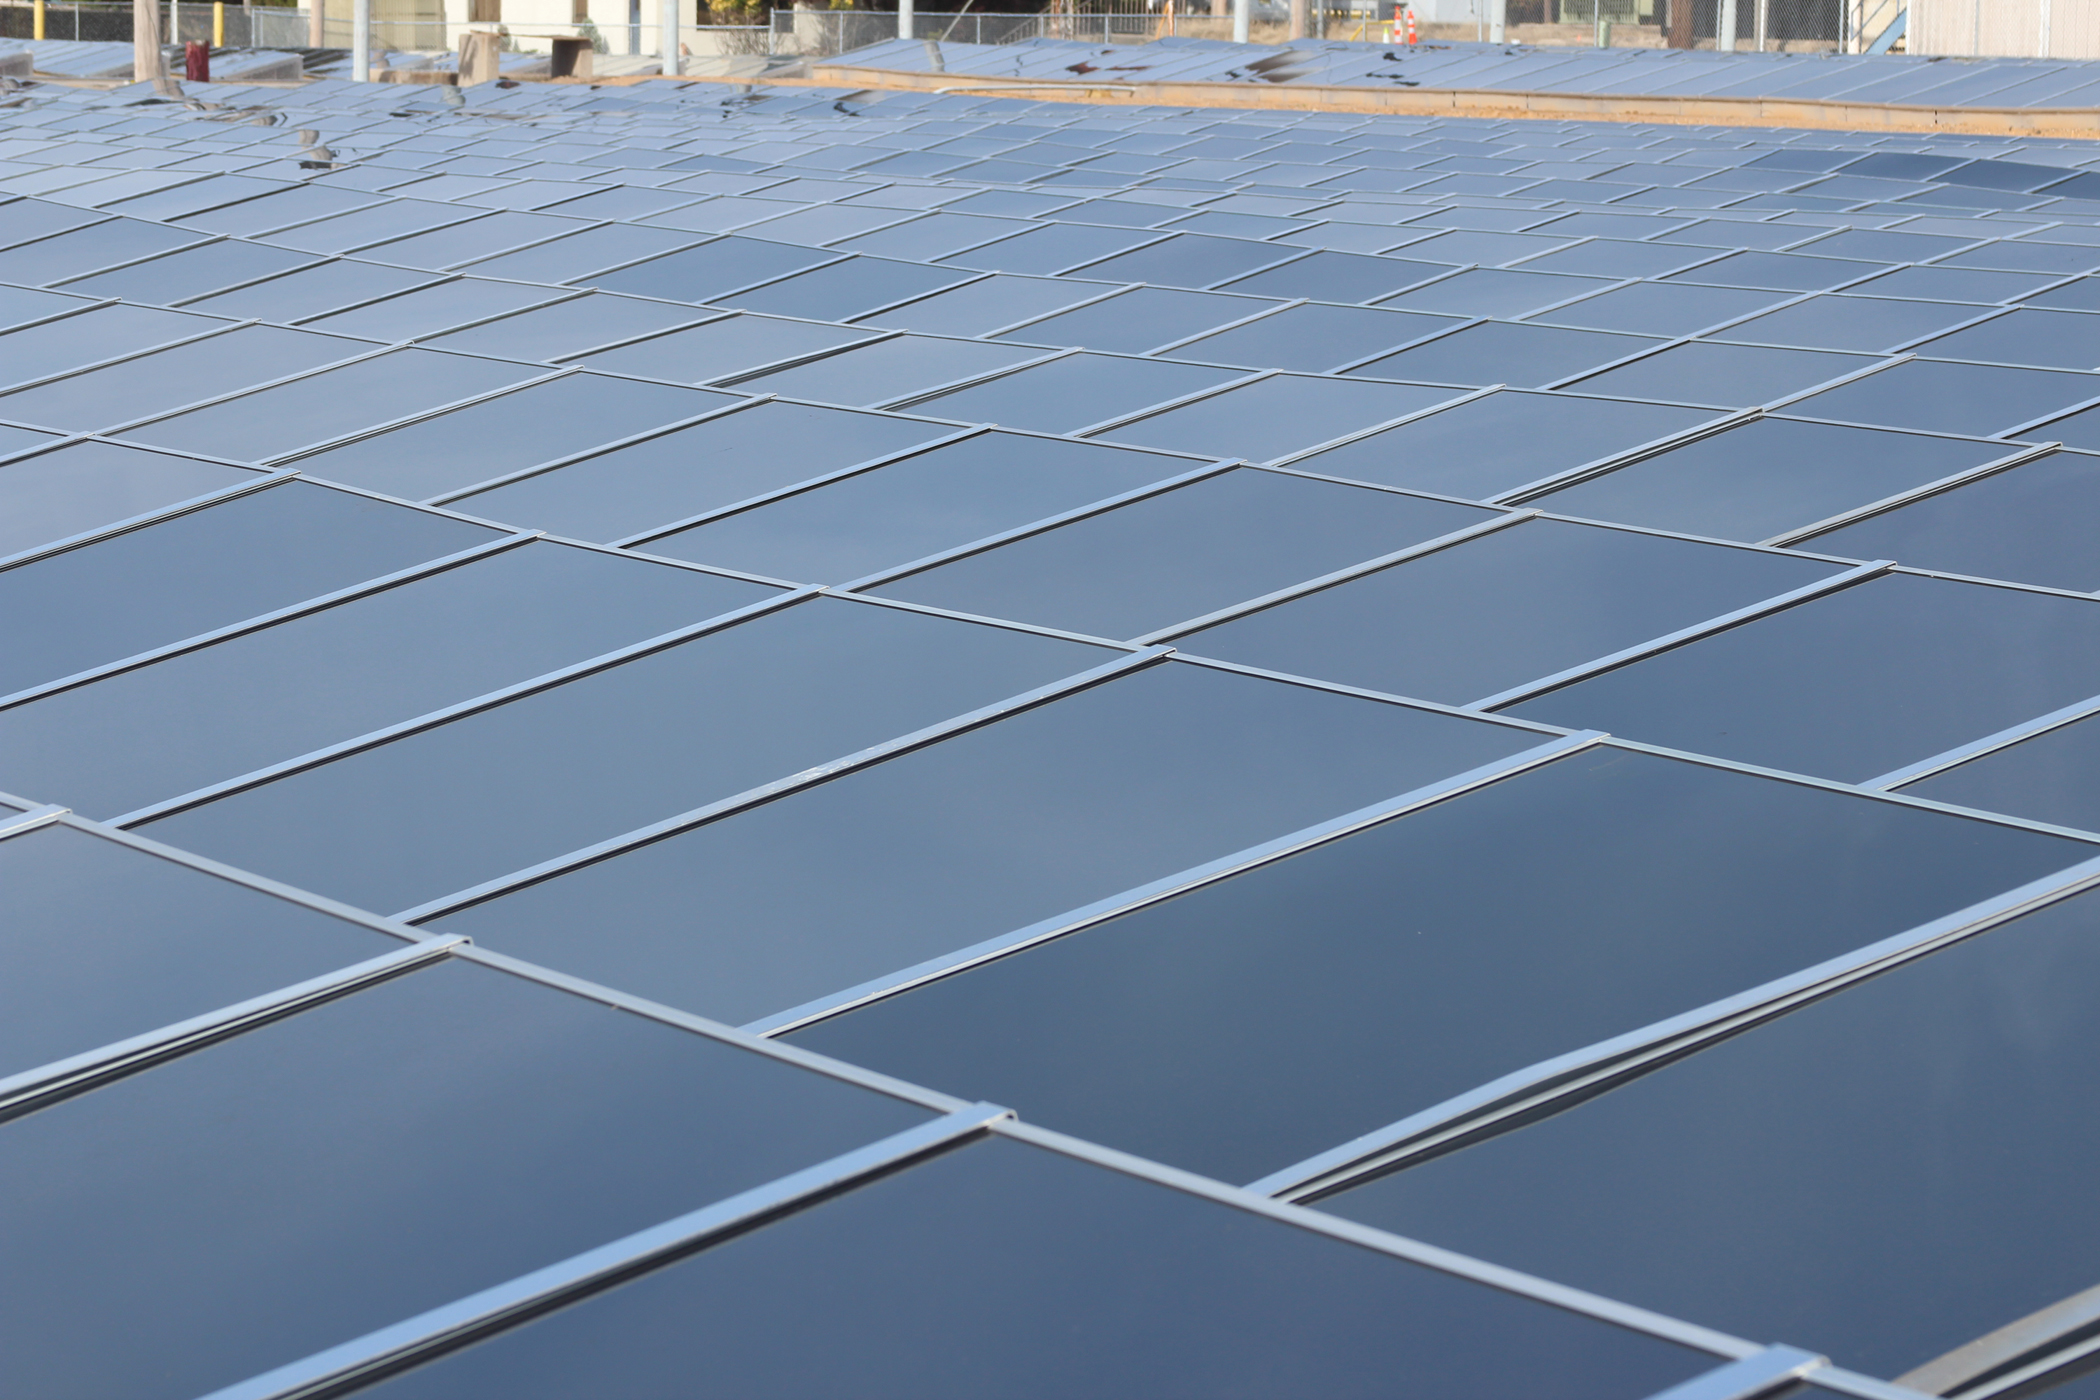  solar energy with a new 1.3 MW photovoltaic array at its Parlin, N.J